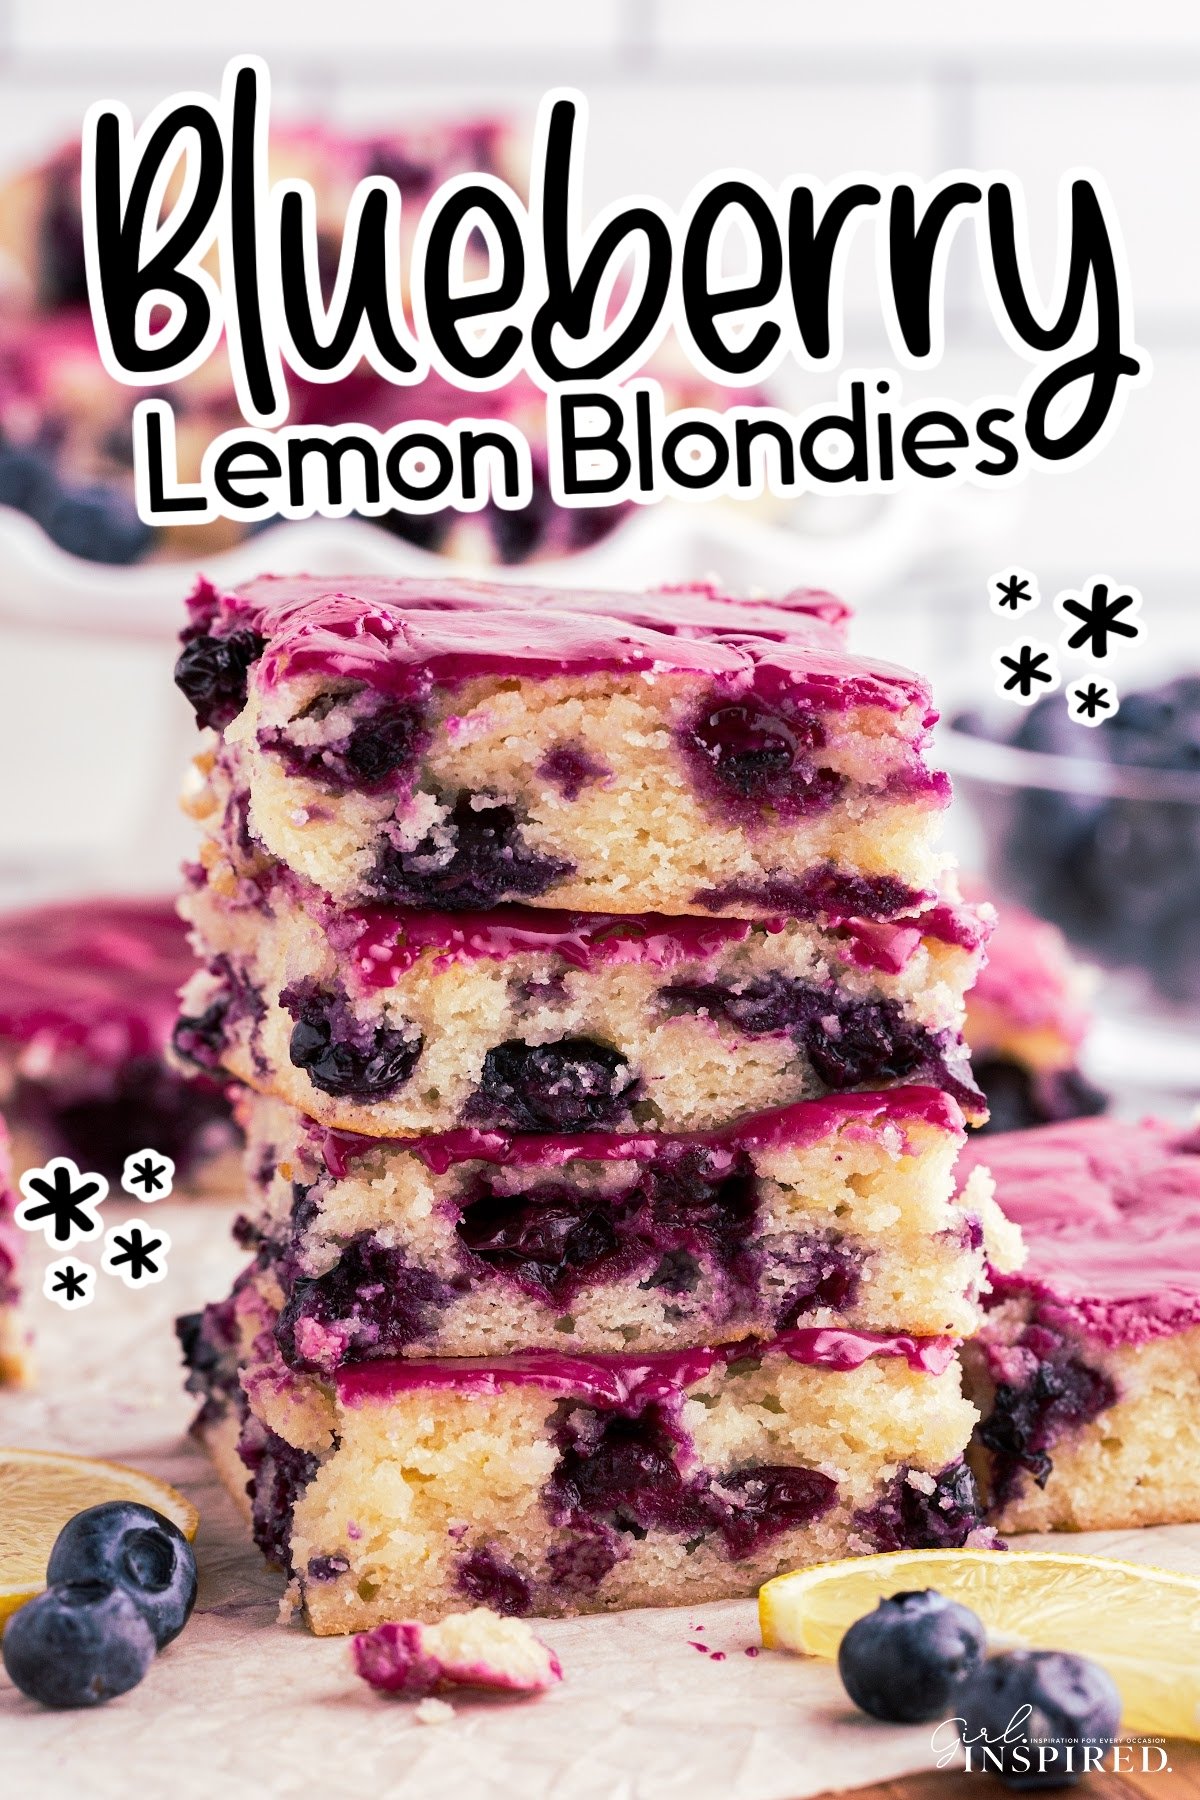 Four vertically stacked Lemon Blueberry Blondies with text overlay.